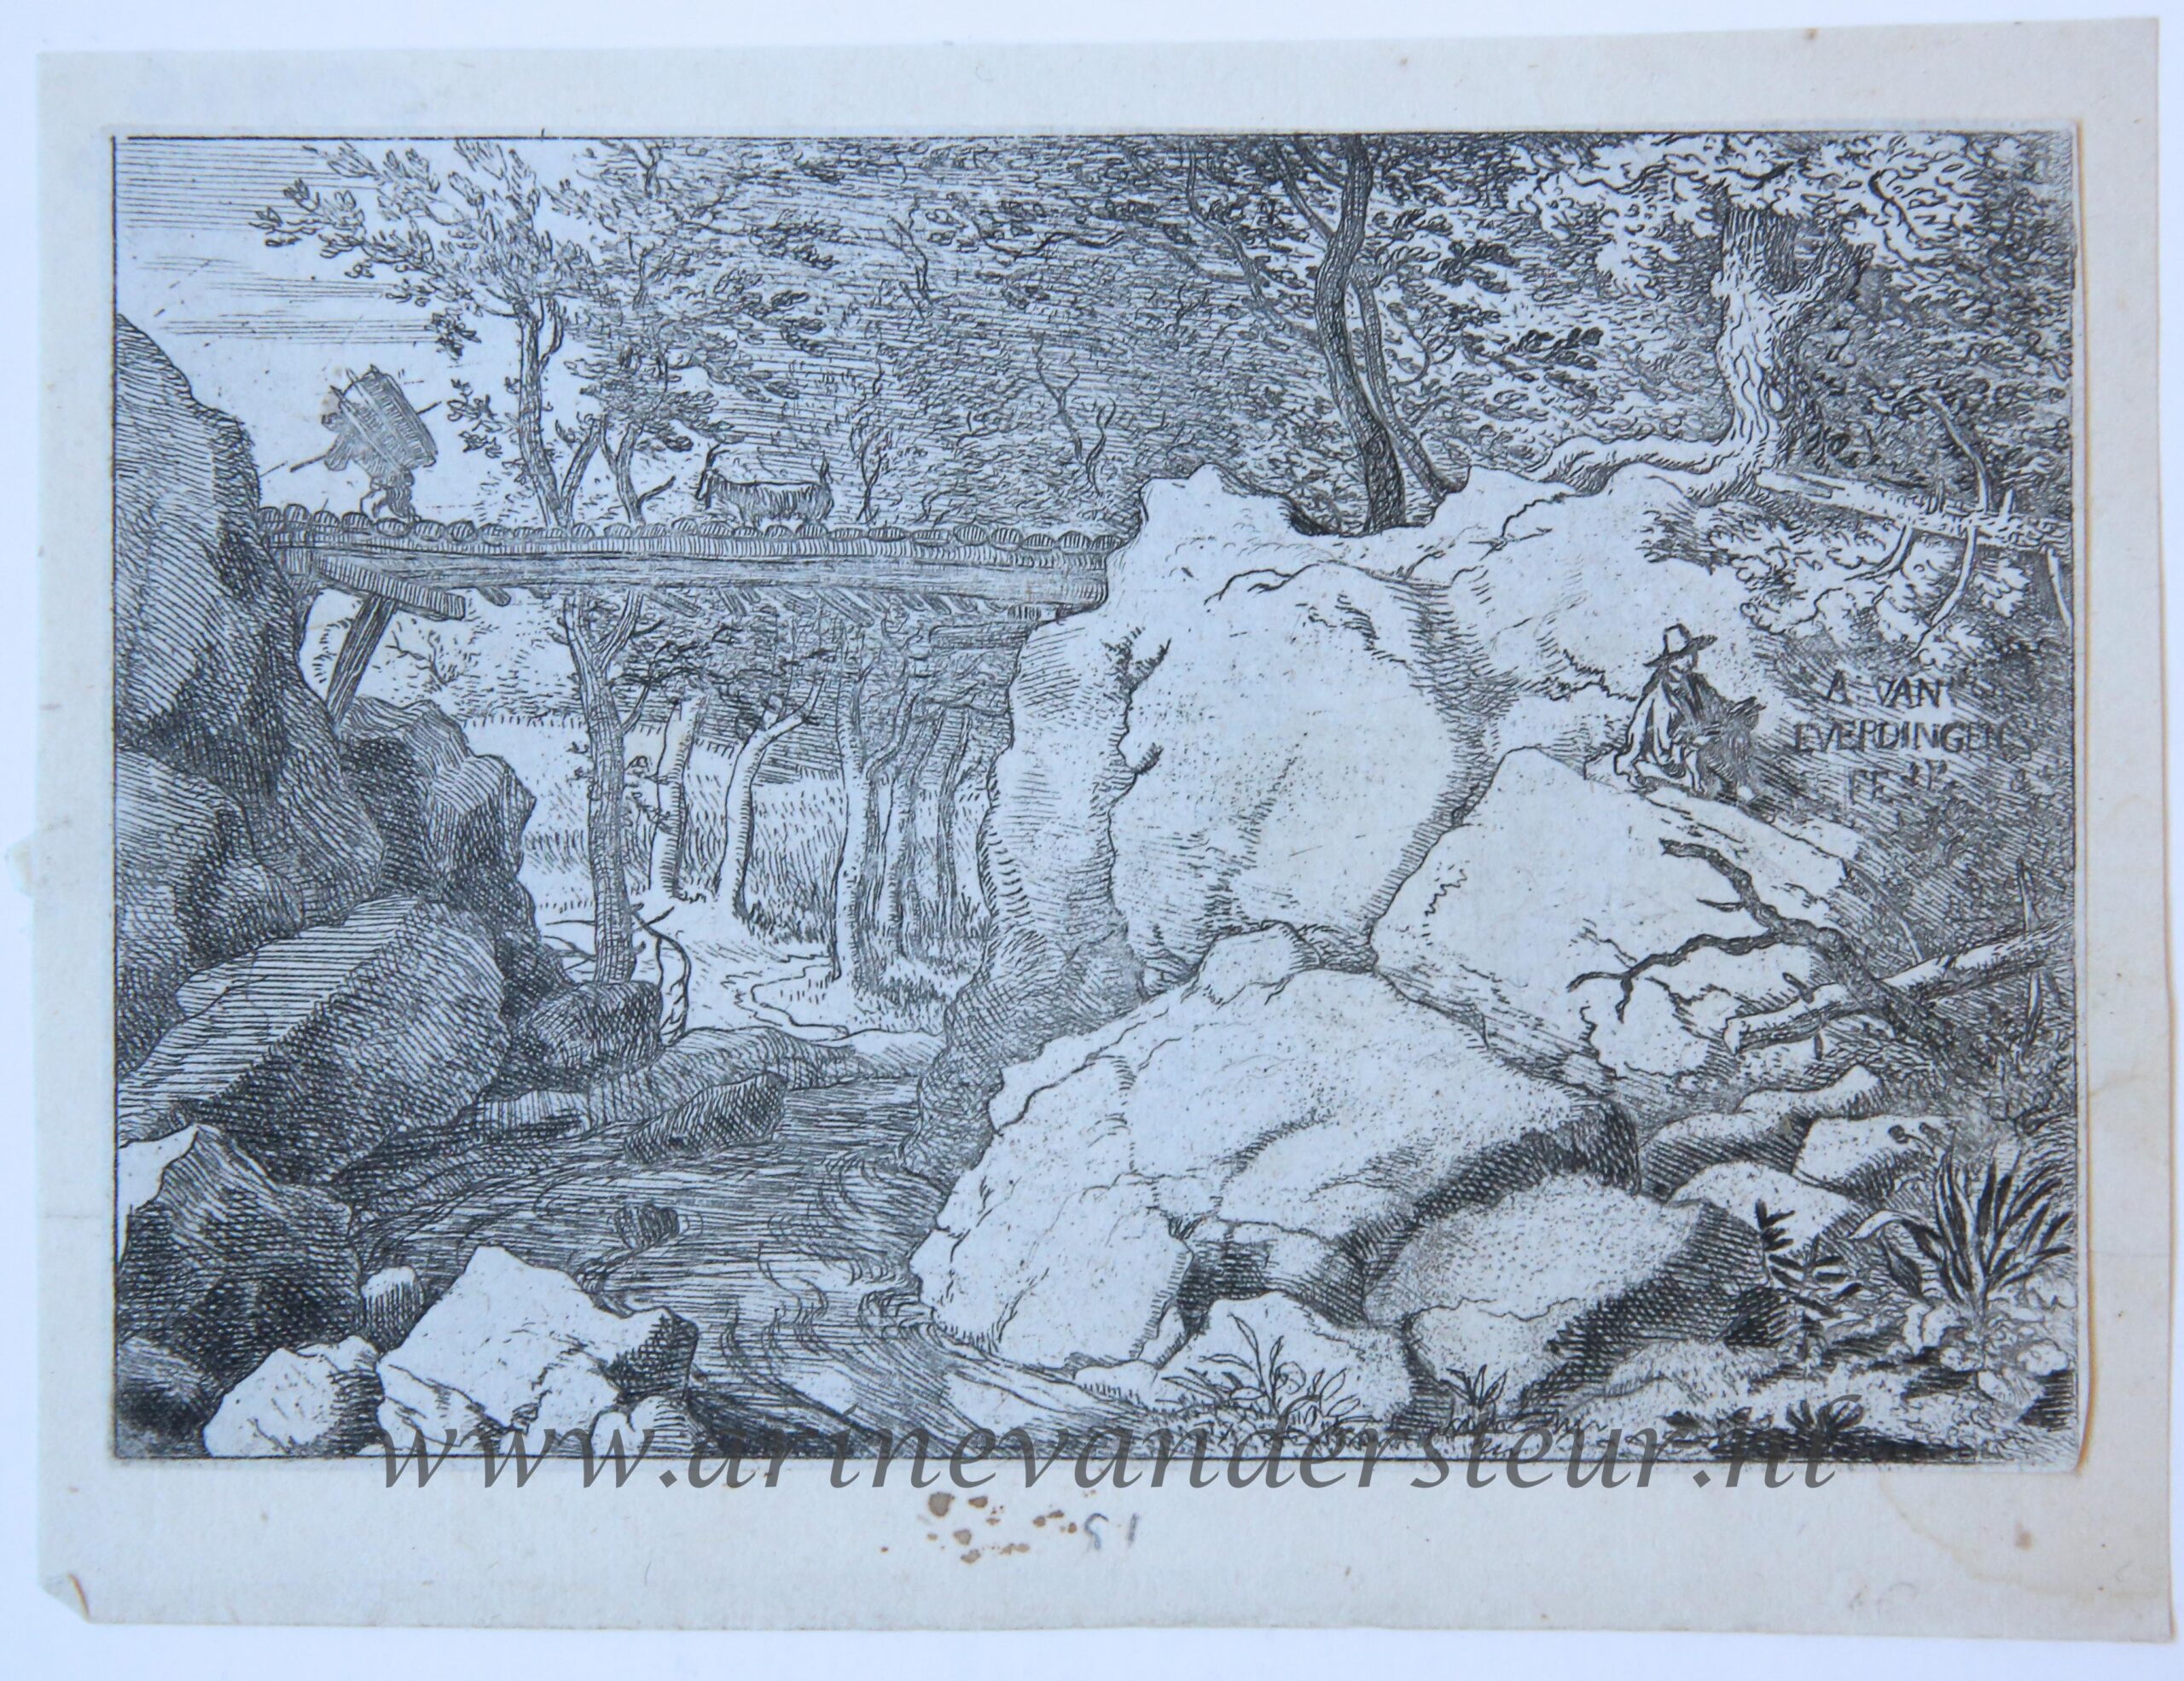 [Antique print, etching] The porter and the goat on a small bridge, published between 1631-1675.